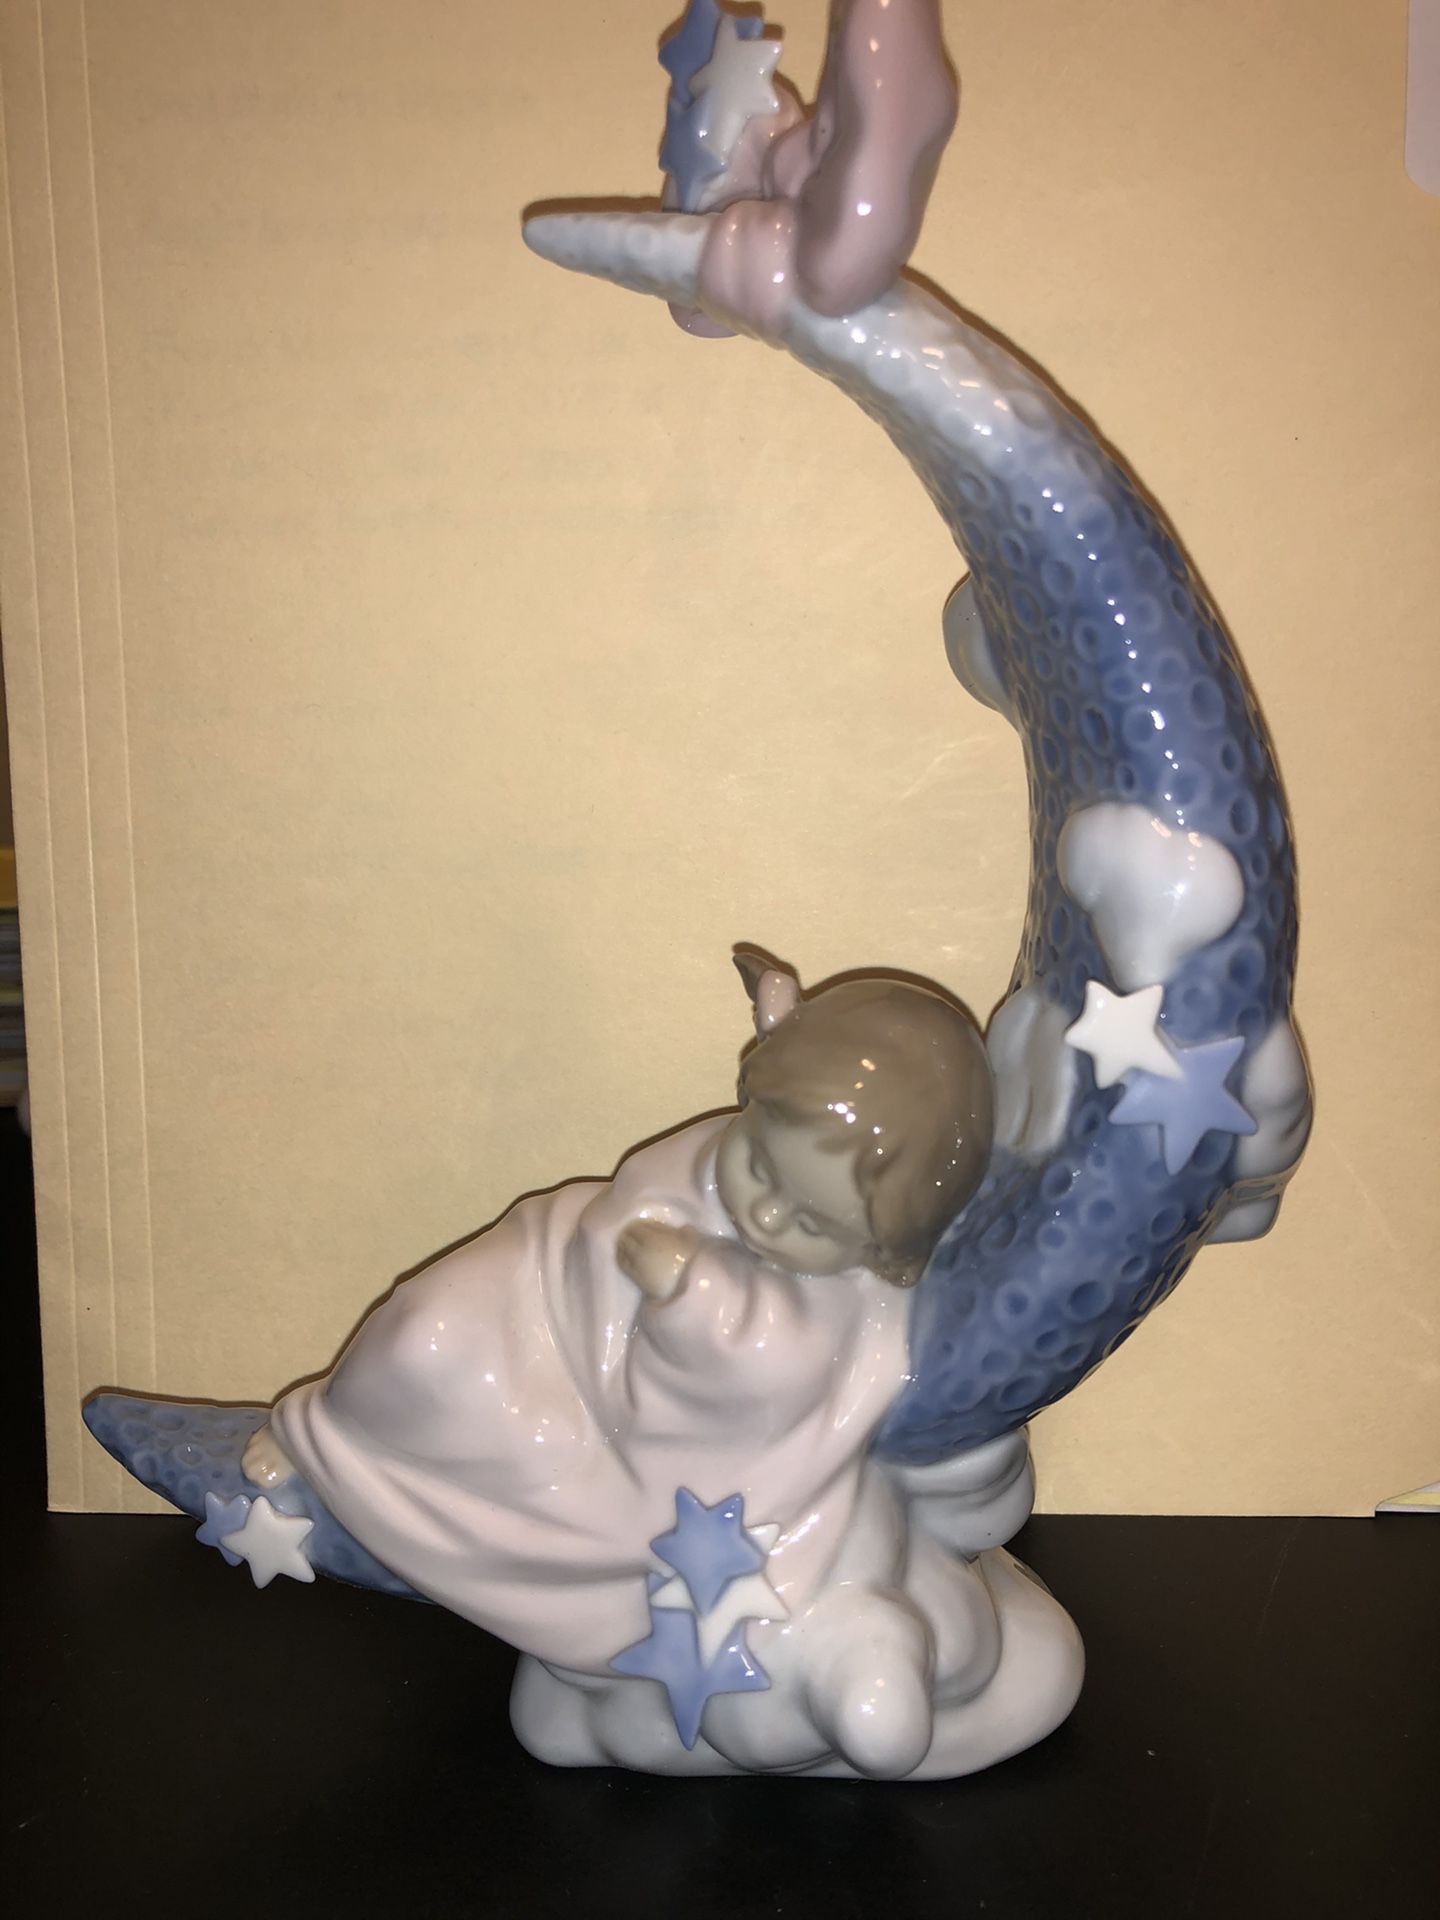 Lladro collectible “Heavens Lullaby Girl Figurine”